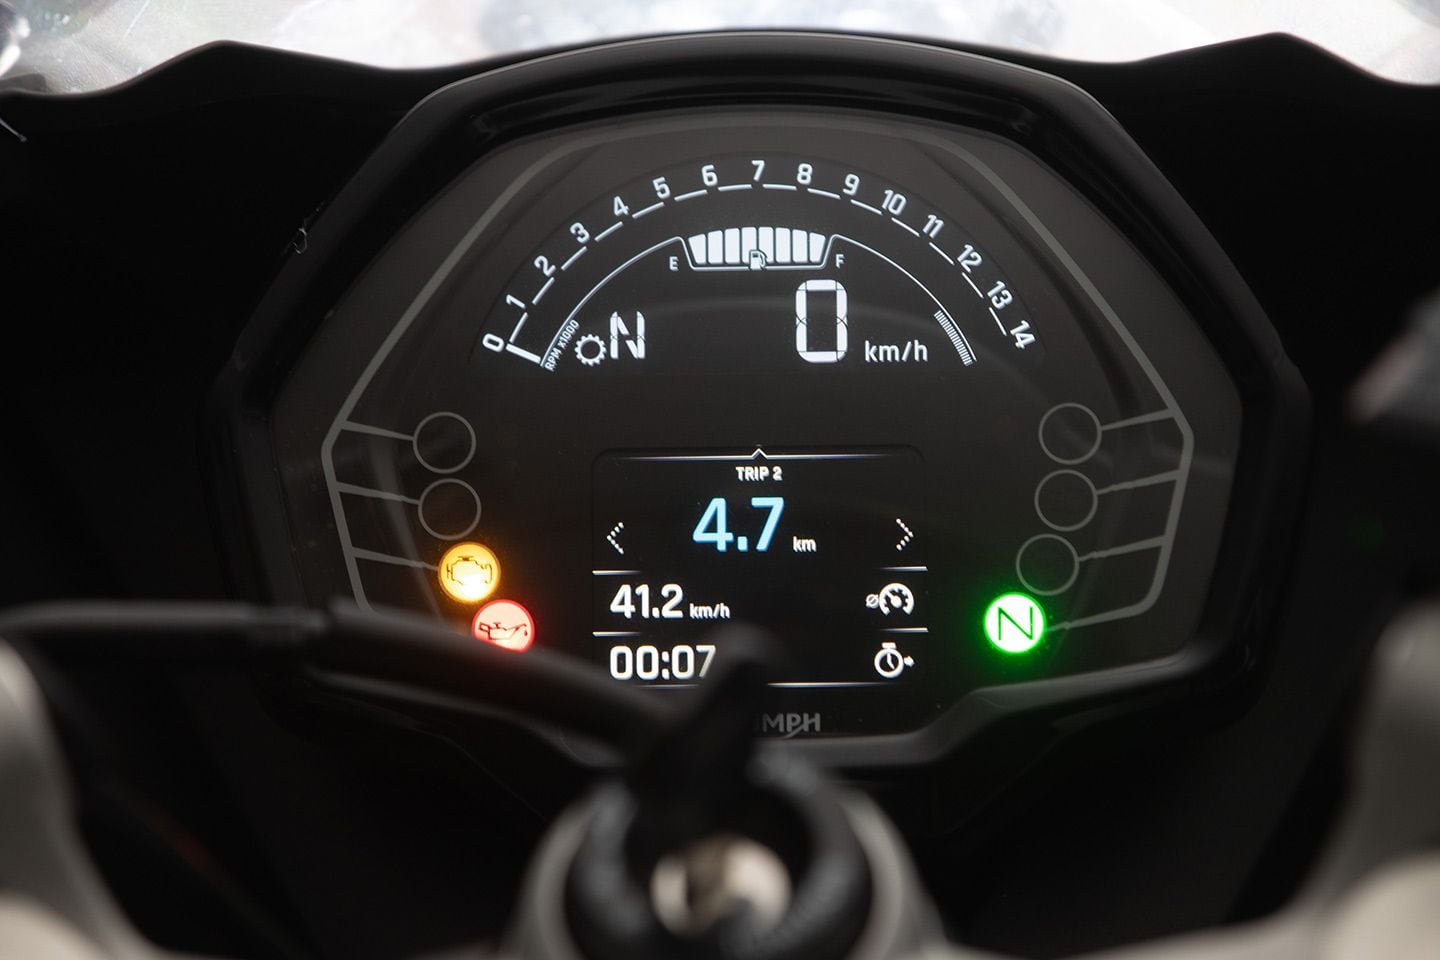 The hybrid TFT/LCD dash displays all the necessary information, from bike info to modes and settings.